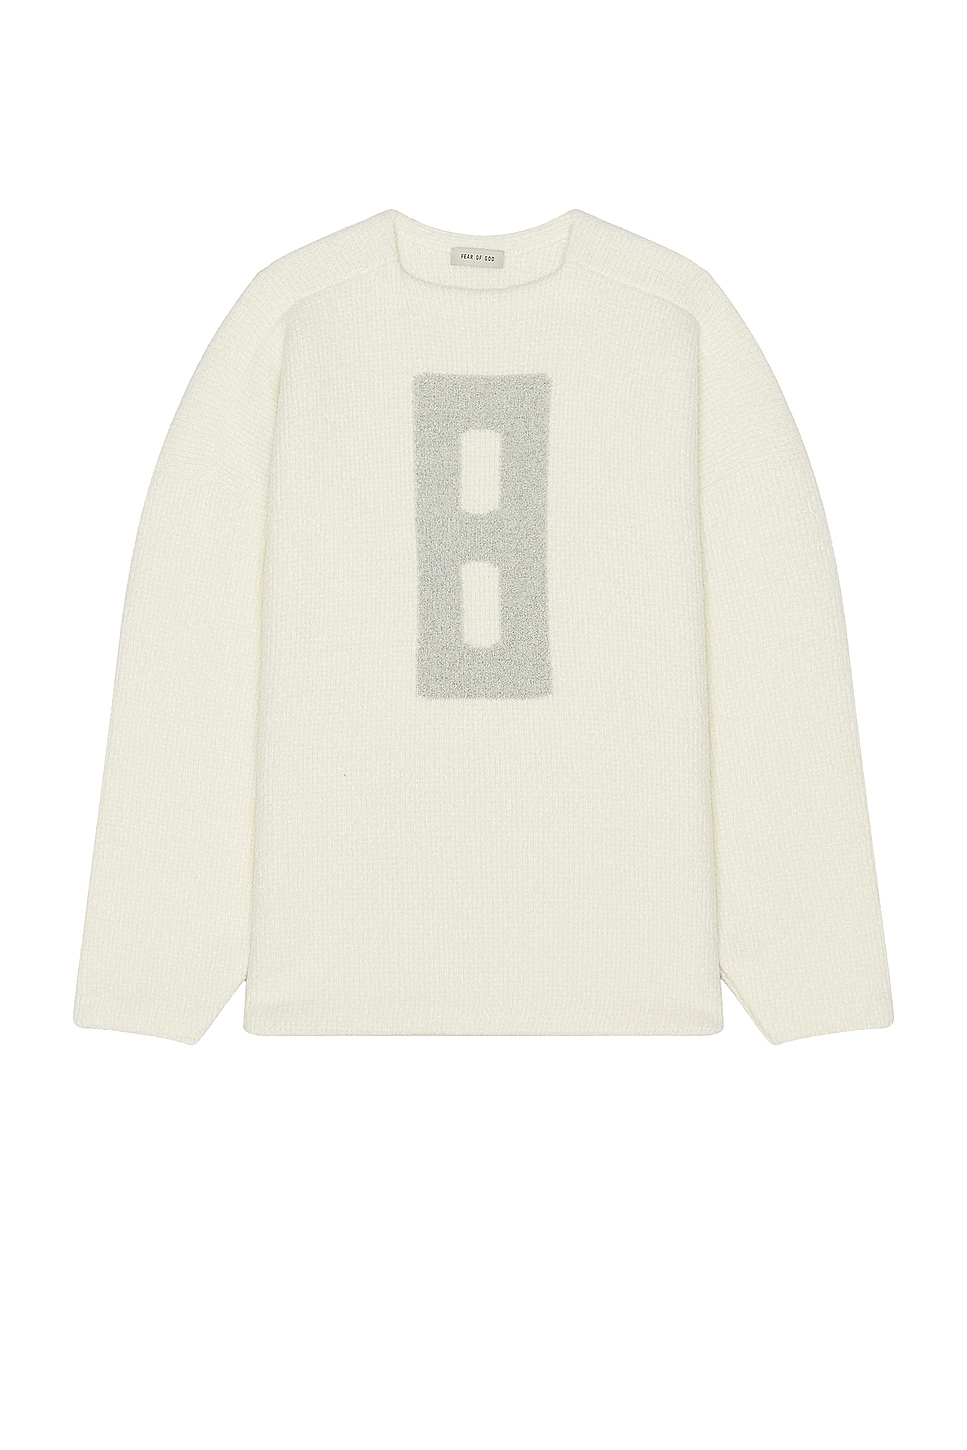 Image 1 of Fear of God Boucle Straight Neck Relaxed Sweater in Cream